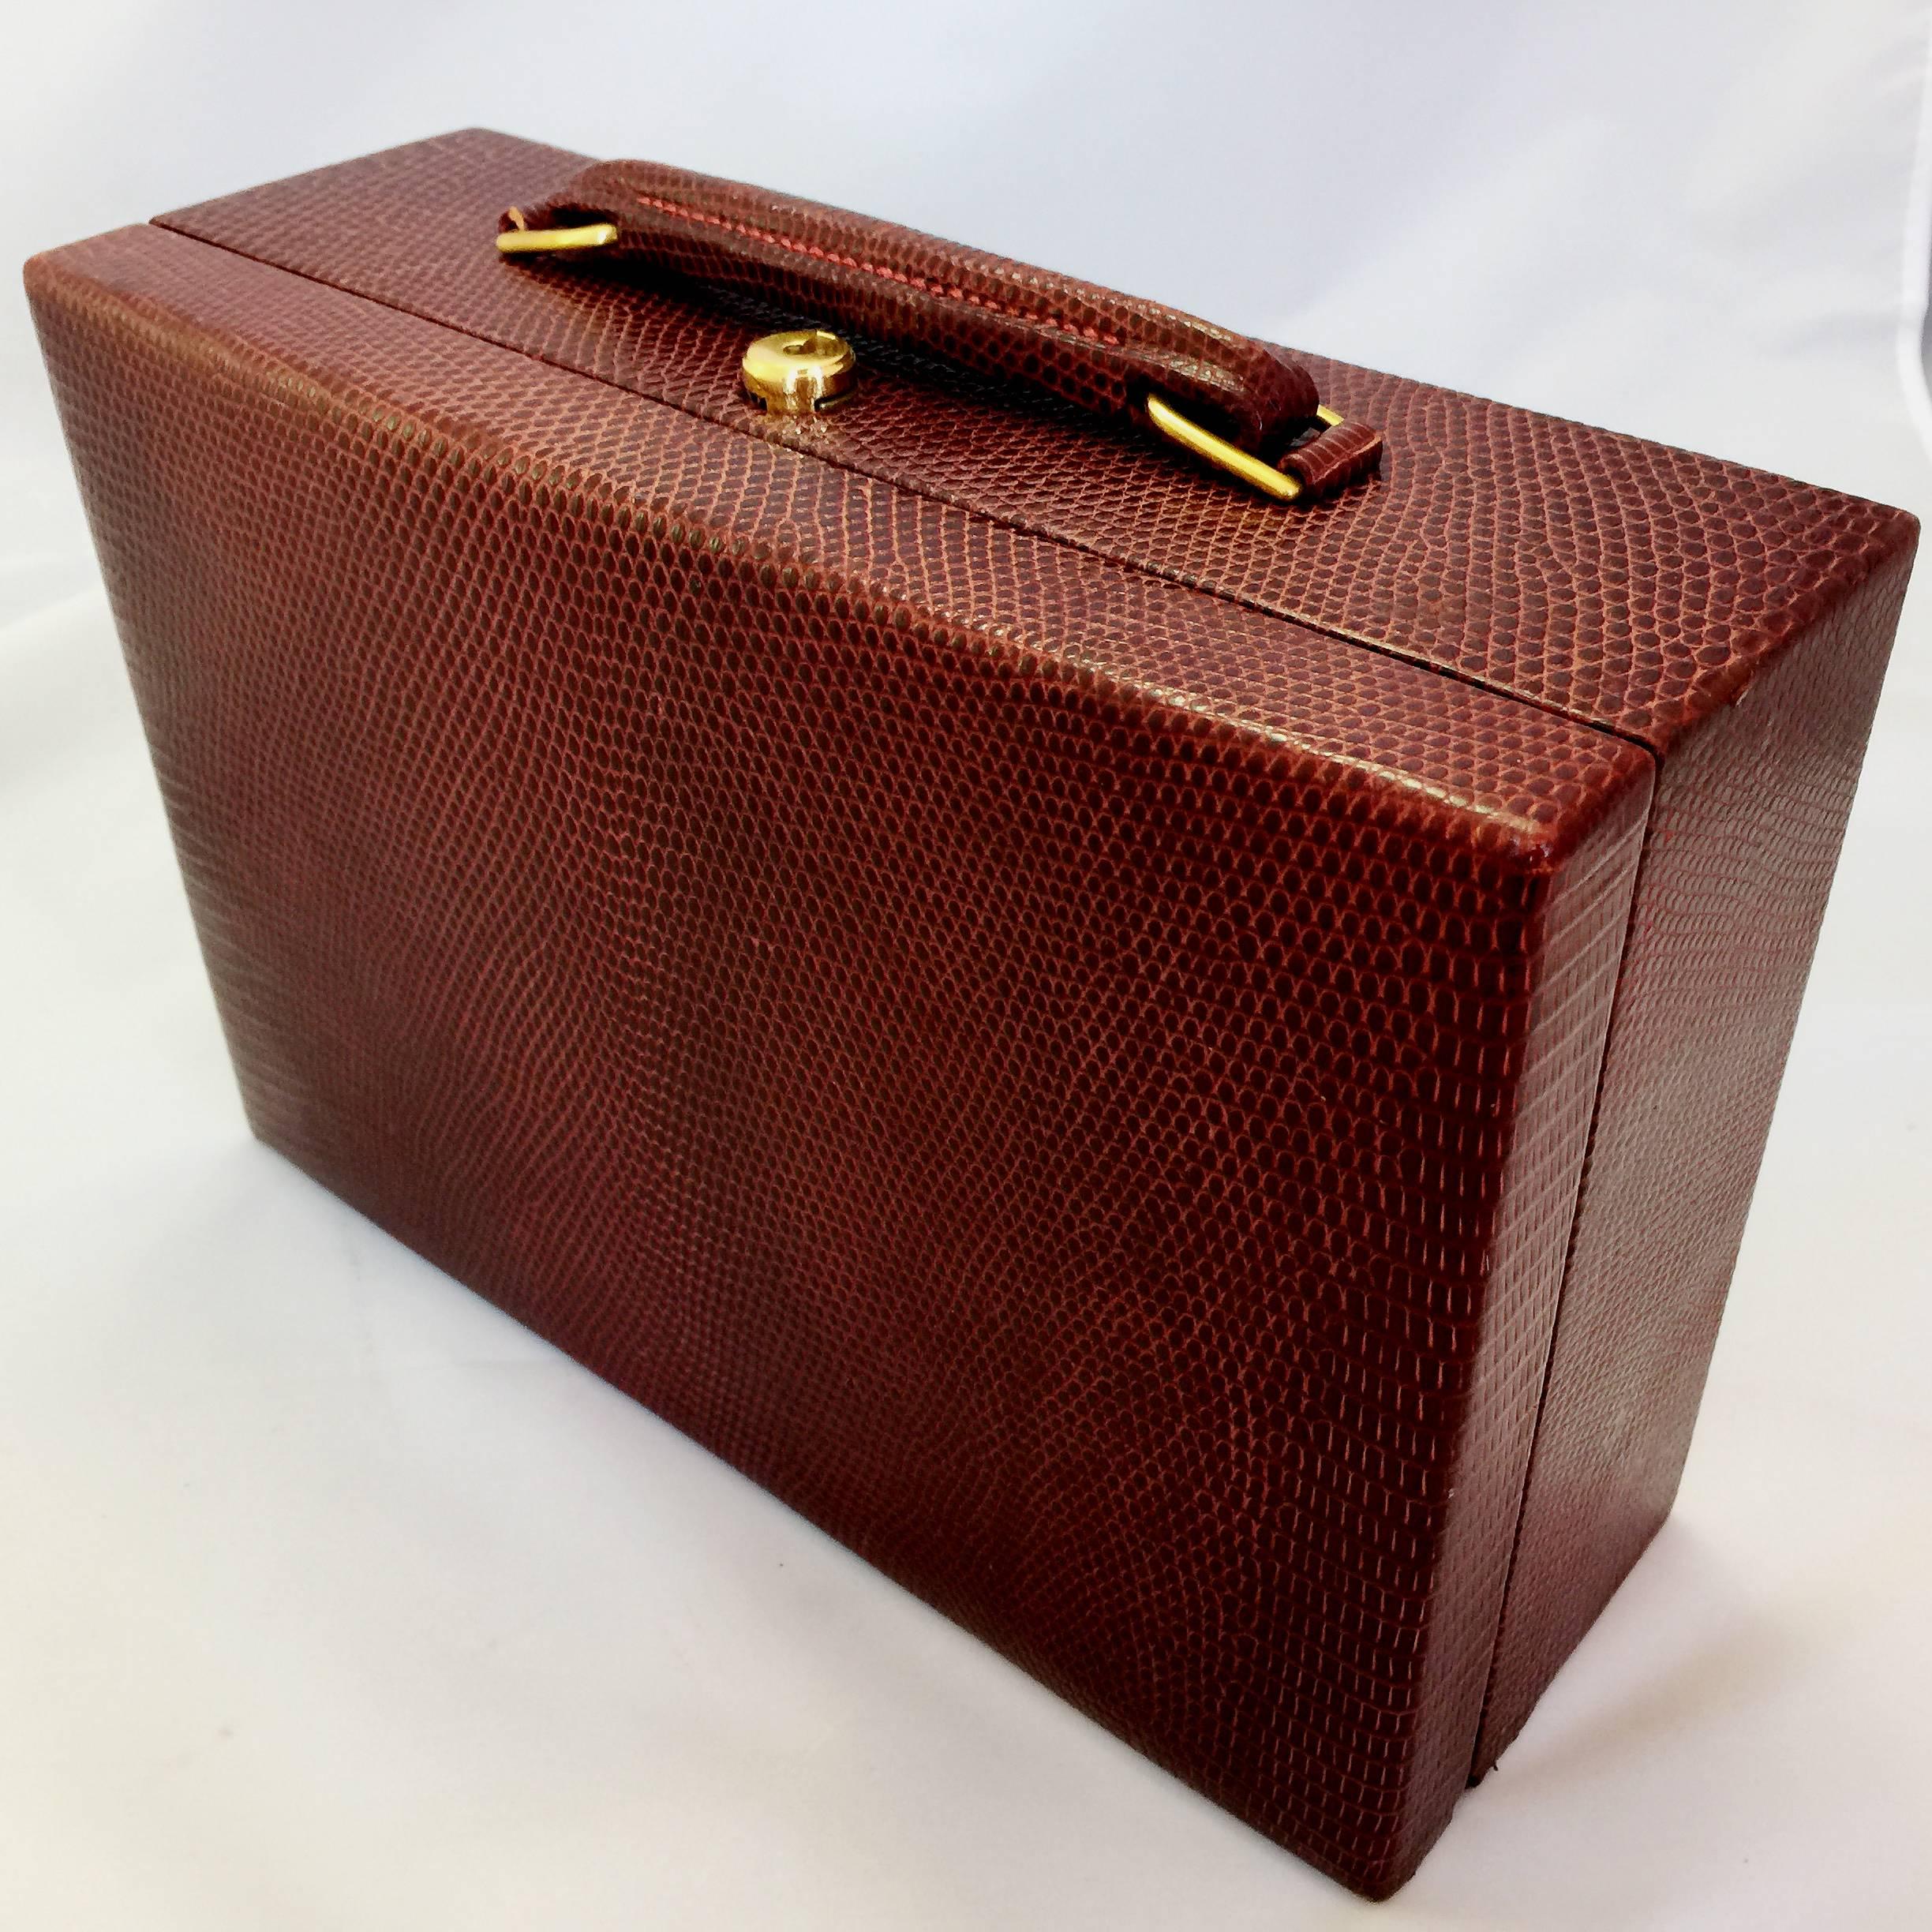 Hermes red lizard skin jewelry box with red velvet lining, brass hardware and 2 original brass keys. Inside is a removable tray with 6 compartments and a large open storage area underneath.

Circa 1950
Signed "Hermes,